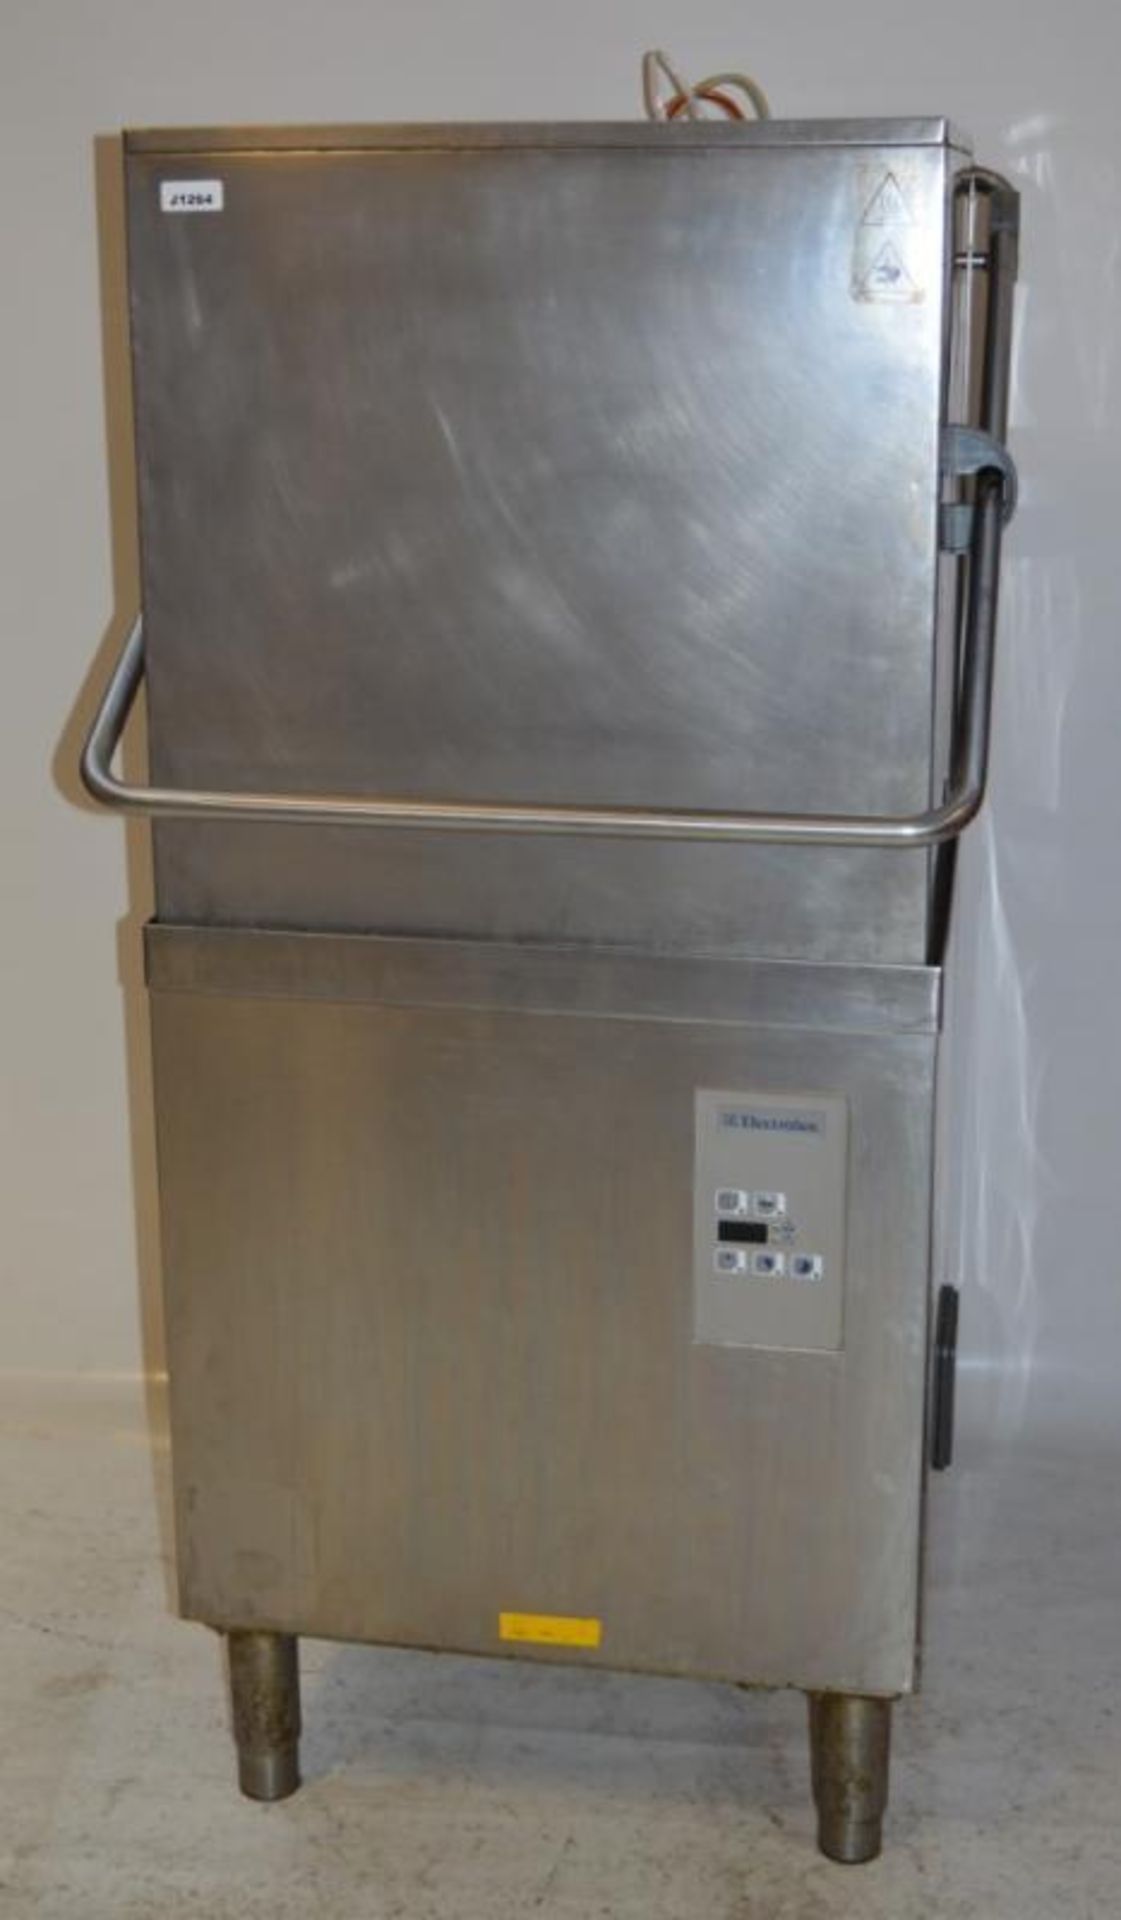 1 x Electrolux NHTG Stainless Steel Passthrough Dishwasher With Brightwell D1 Automatic Dosing Pump - Image 11 of 13